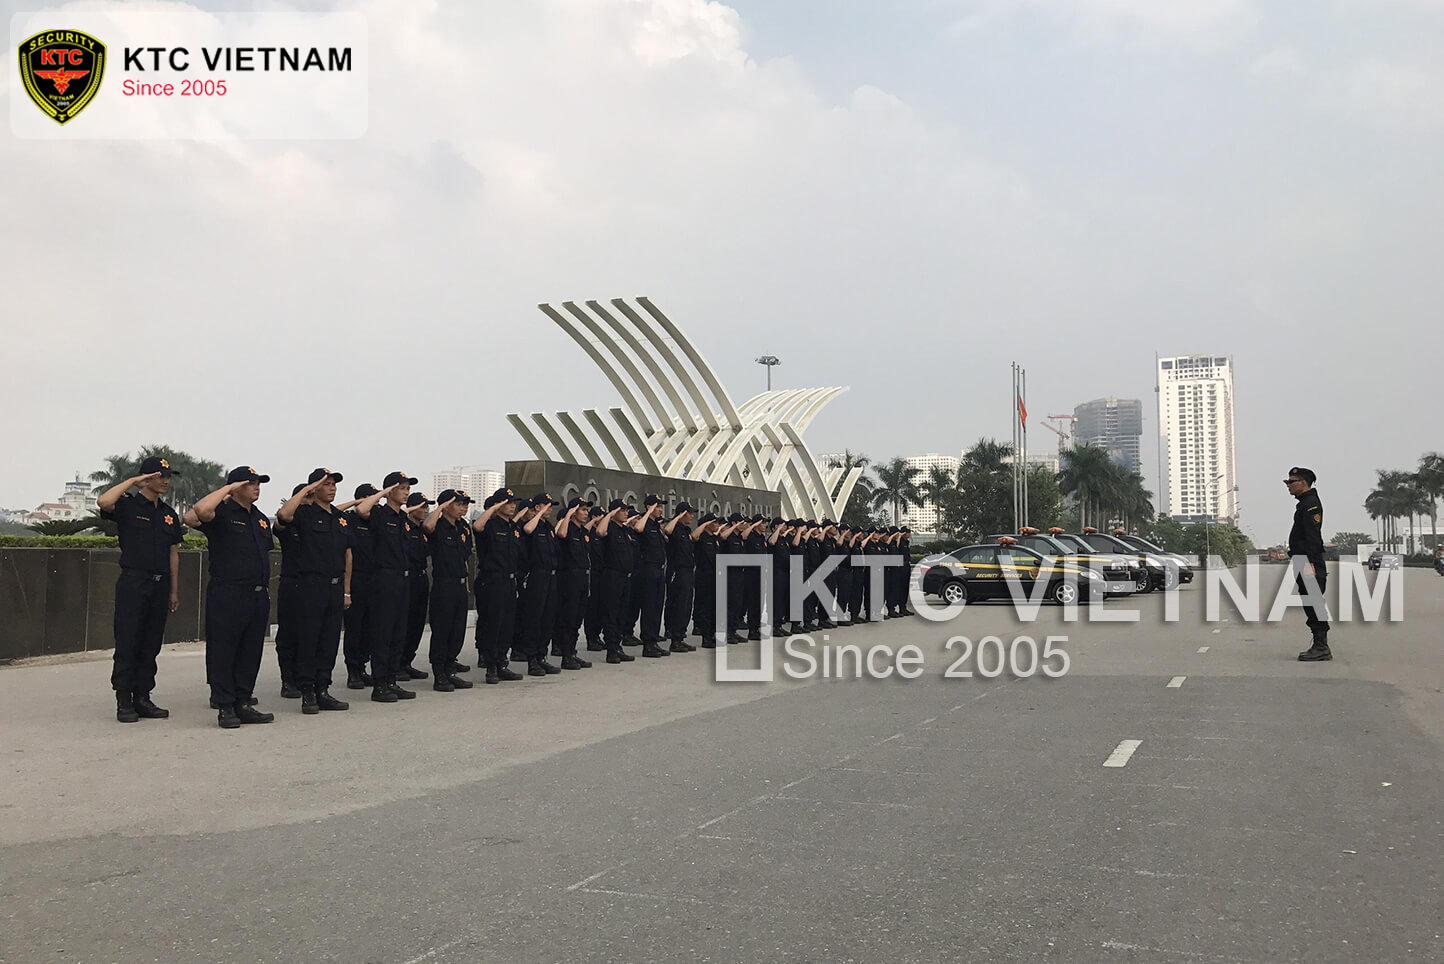 Security service deployed for StarLake Urban Area